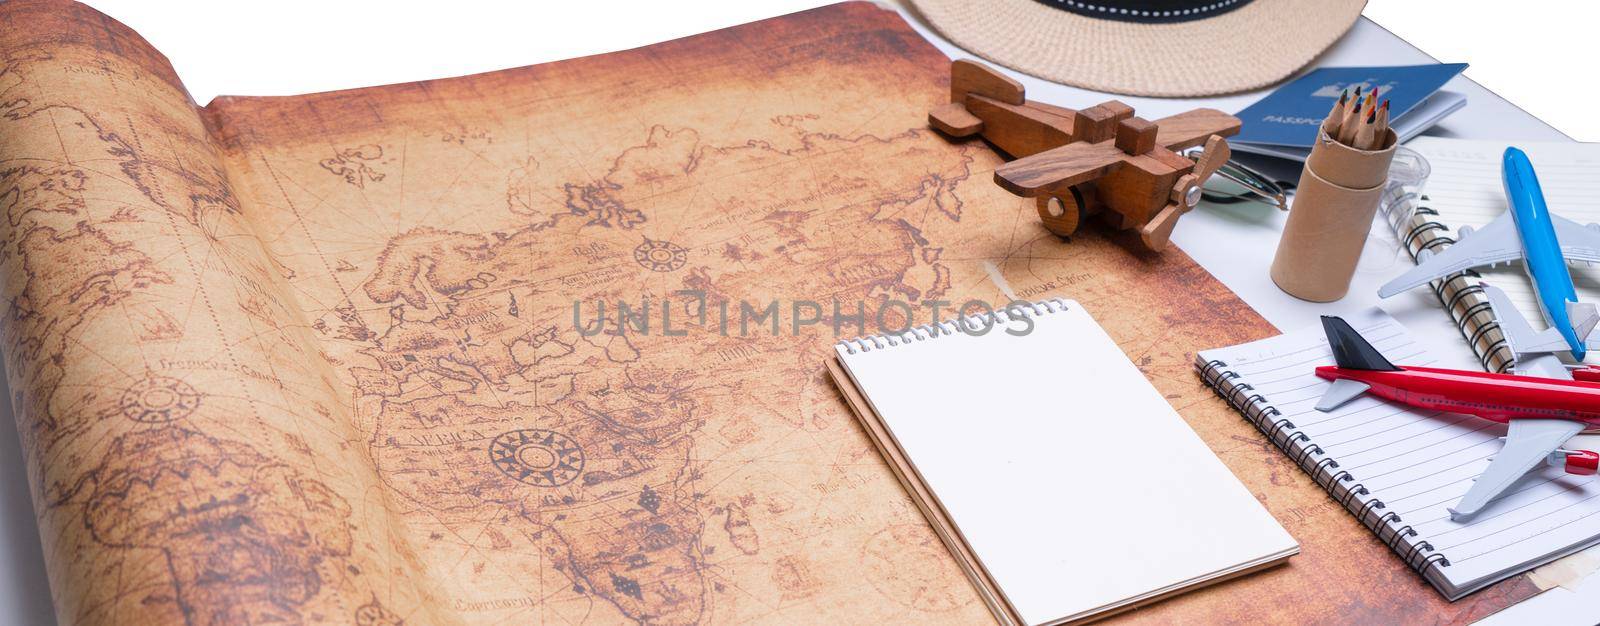 Banner for travel background.  Object and accessories for travelers by Buttus_casso